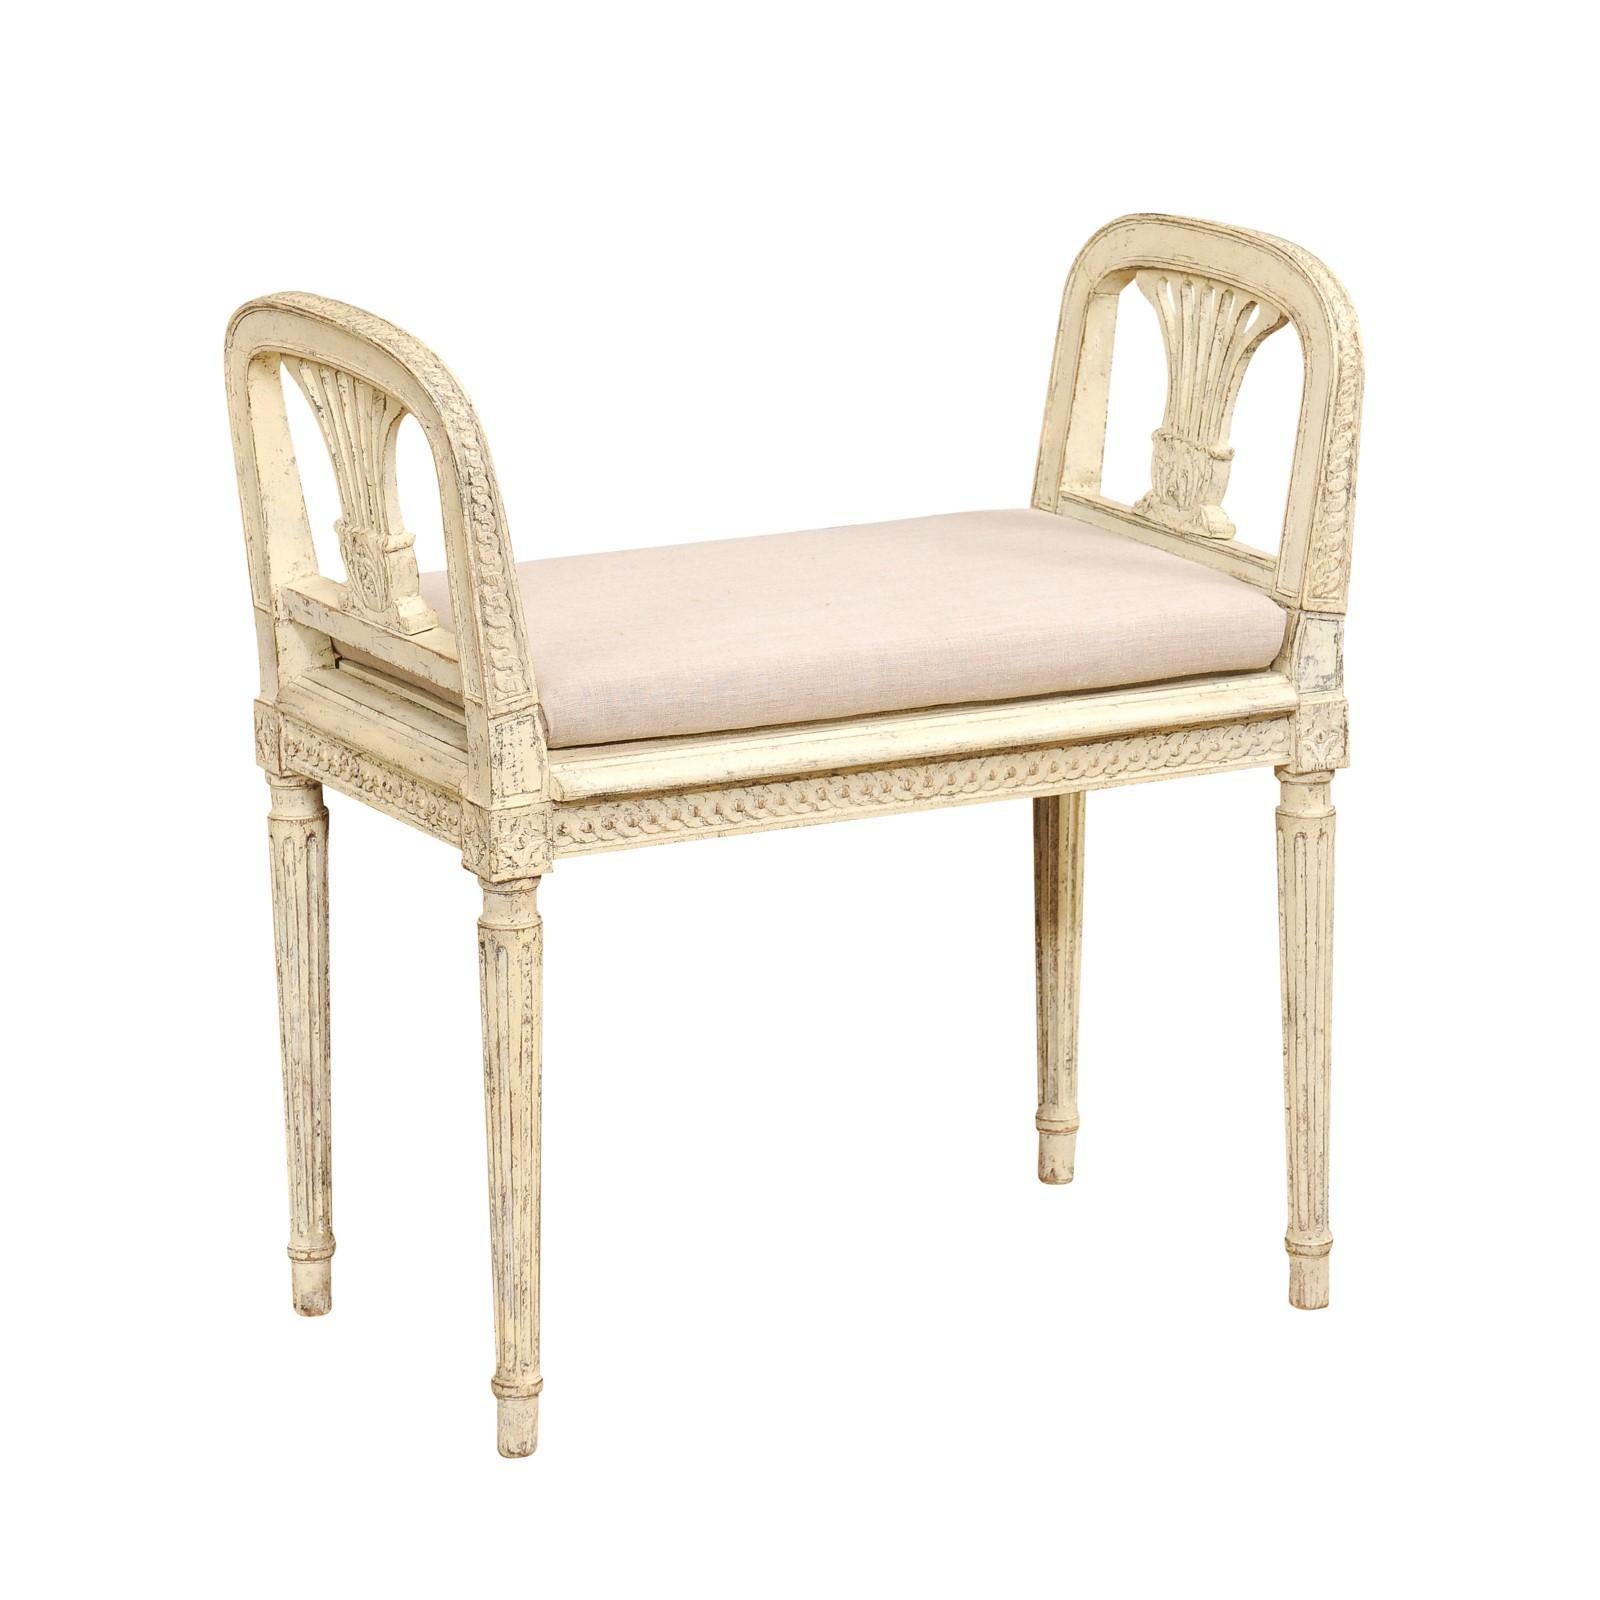 A Swedish Neoclassical style small bench from the 20th century with gray and cream painted finish, carved side supports, guilloche friezes and fluted legs. This Swedish Neoclassical style small bench, crafted in the 20th century, is a stunning